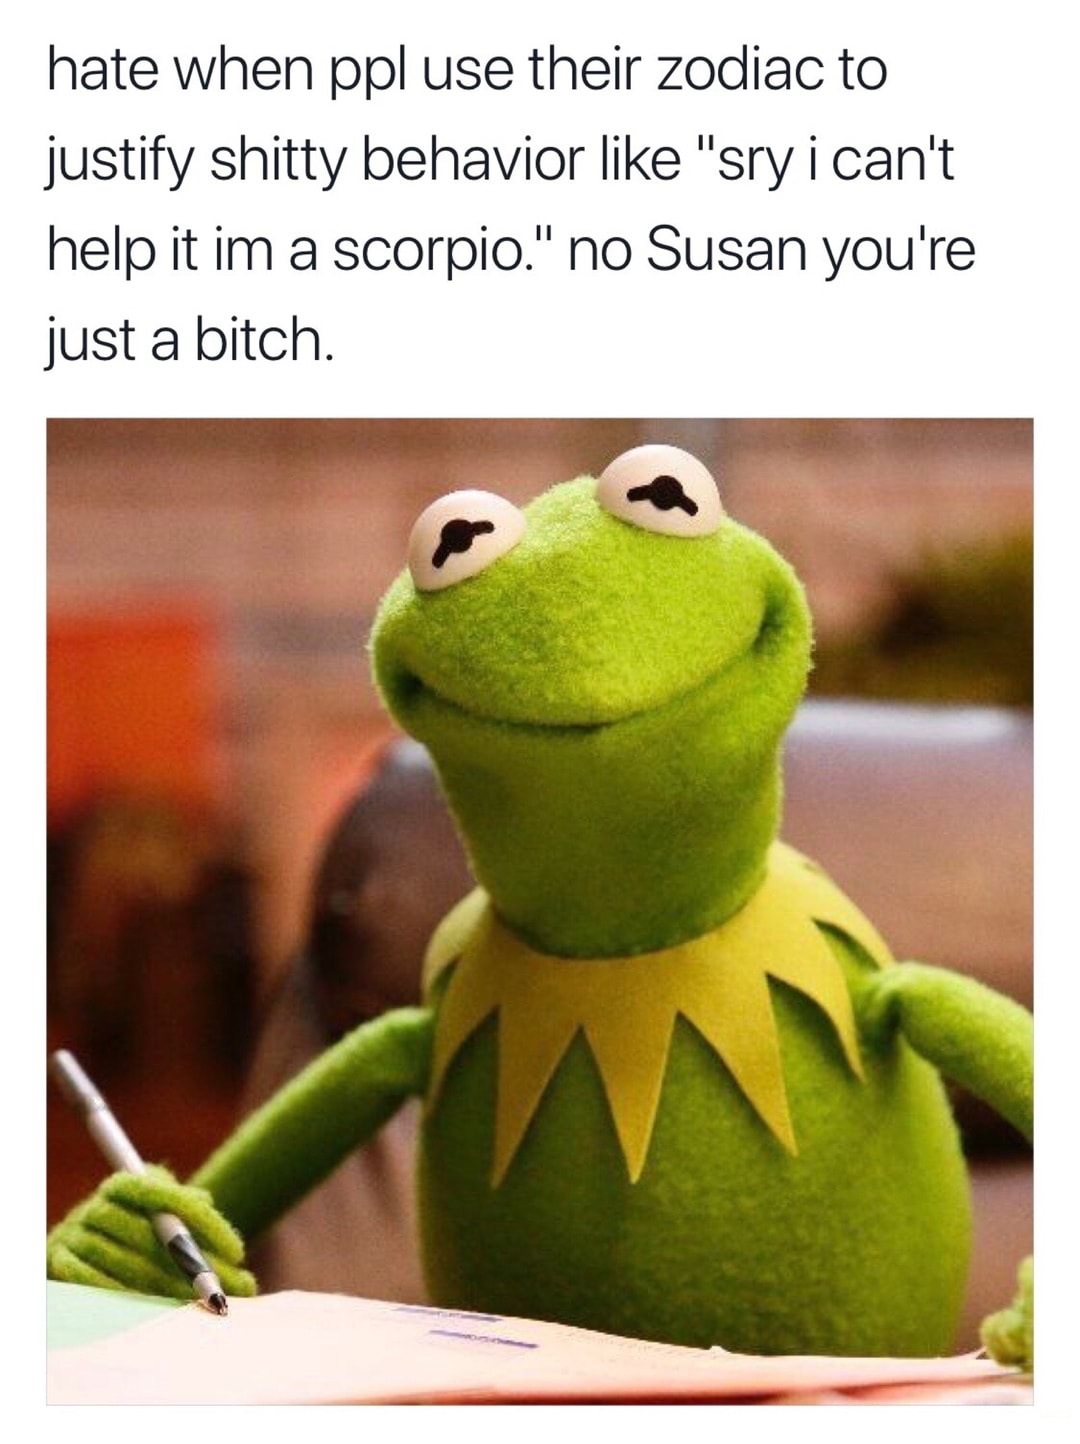 memes - no susan your just a bitch - hate when ppl use their zodiac to justify shitty behavior "sry i can't help it im a scorpio." no Susan you're just a bitch.